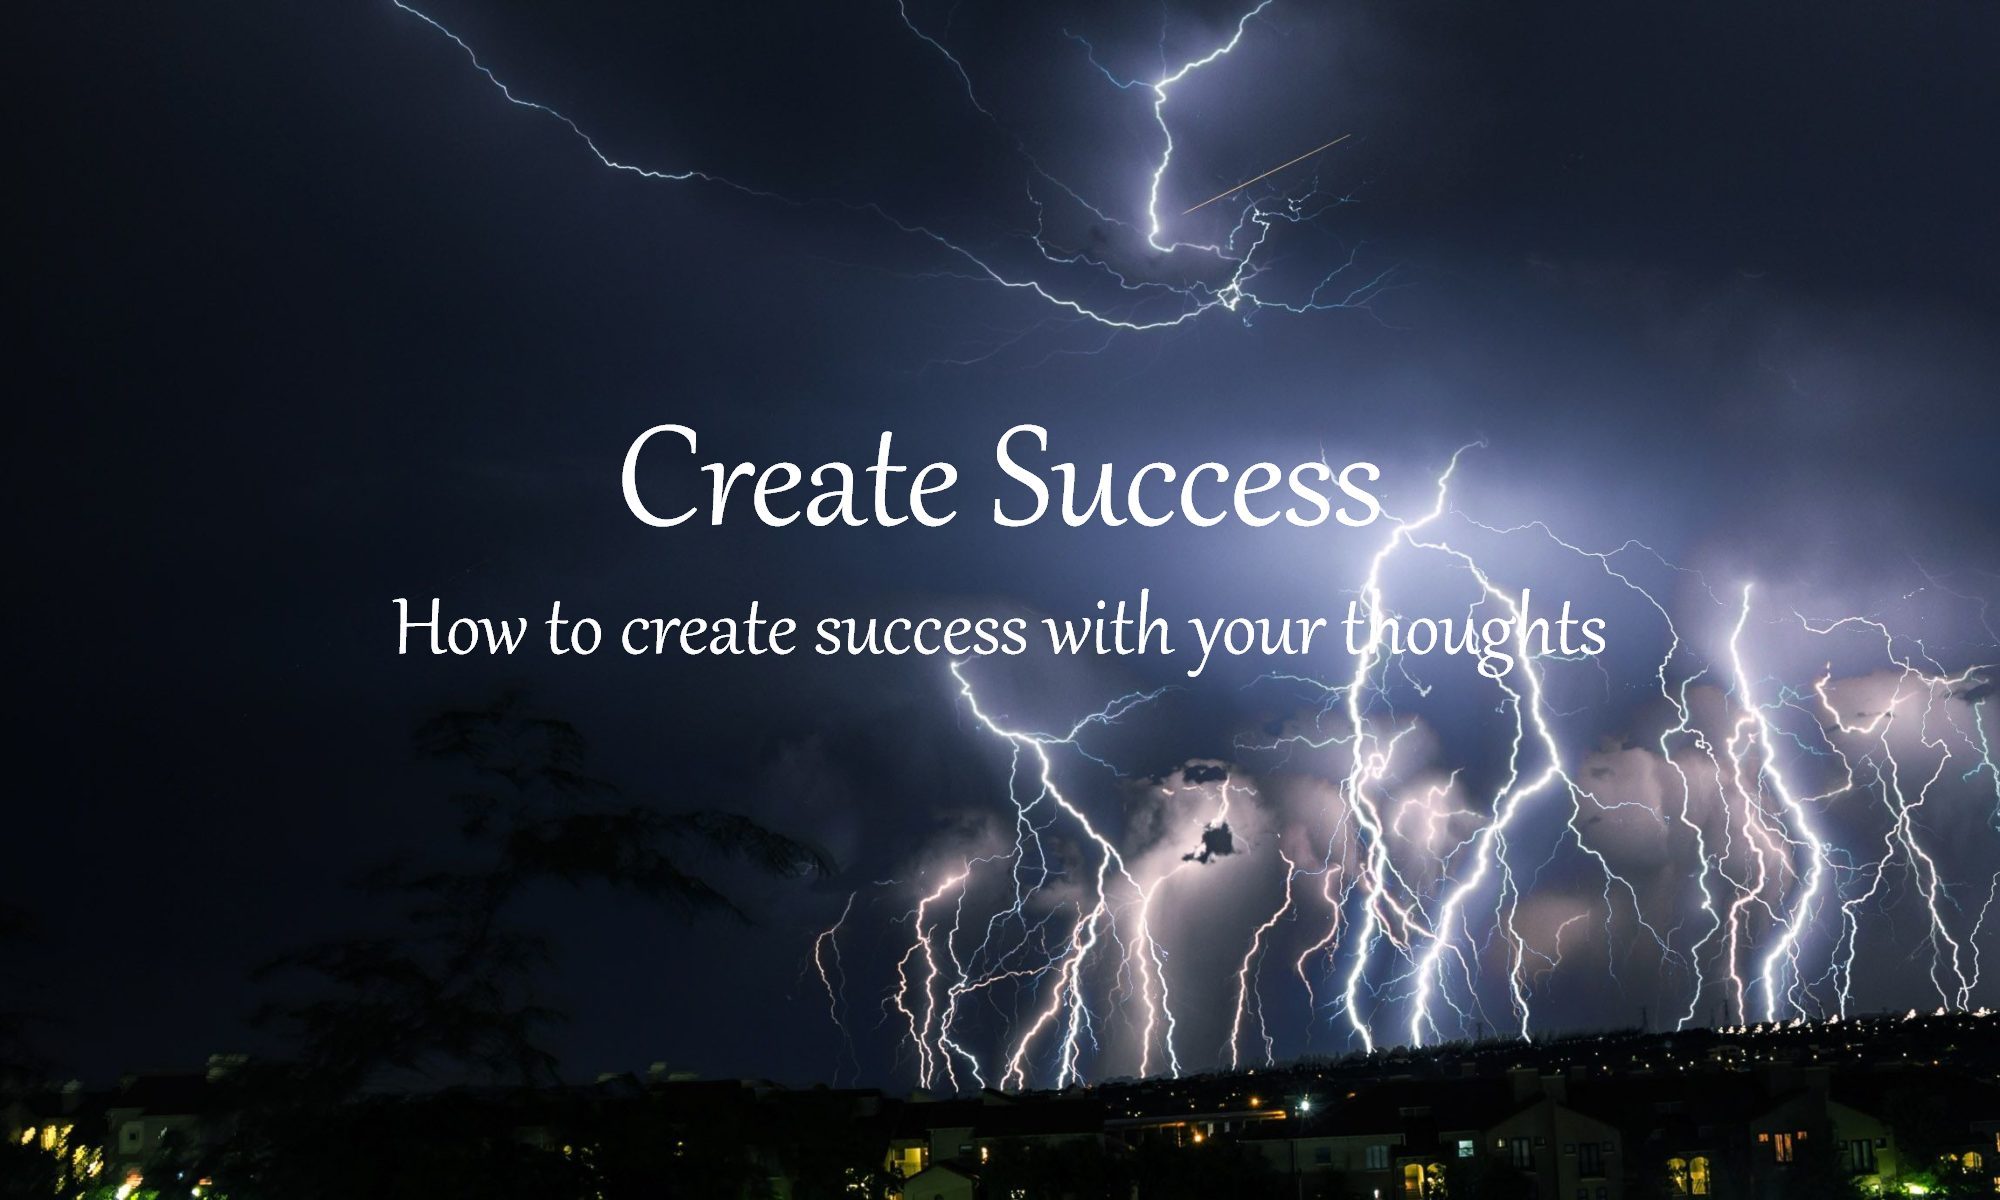 How do I create success with my thoughts mind